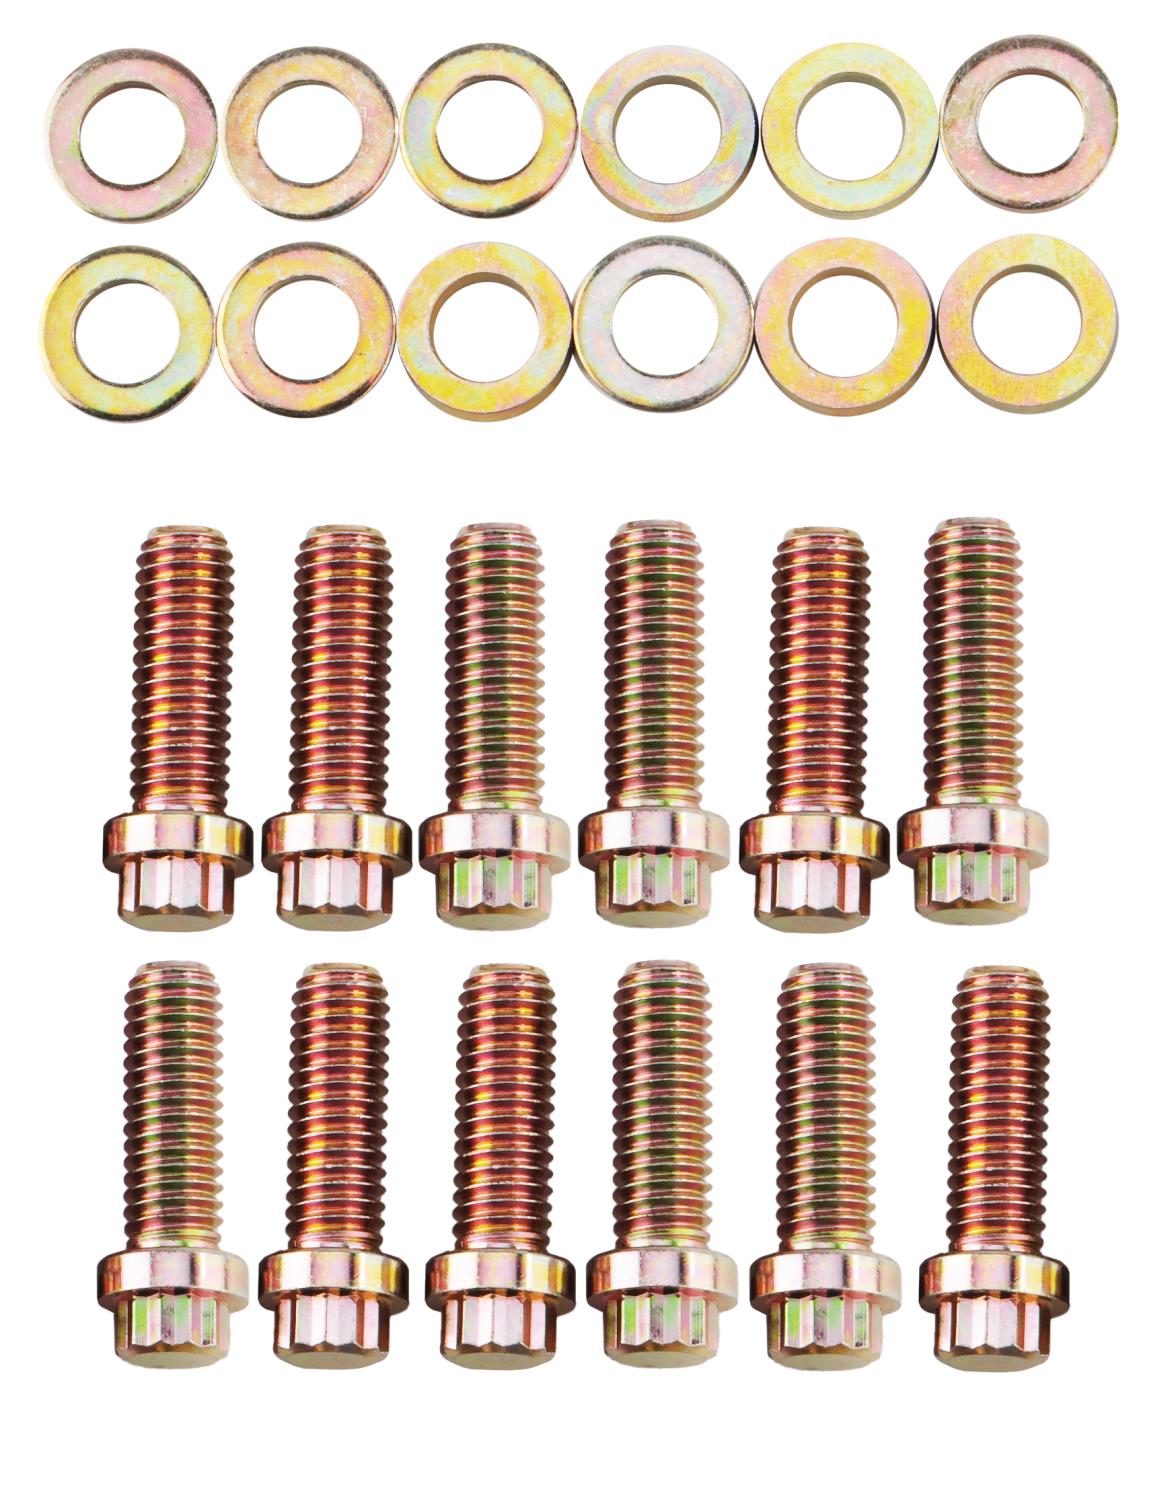 12-Point Intake Manifold Bolts for Chevy, Mopar and AMC [Zinc Dichromate Gold]